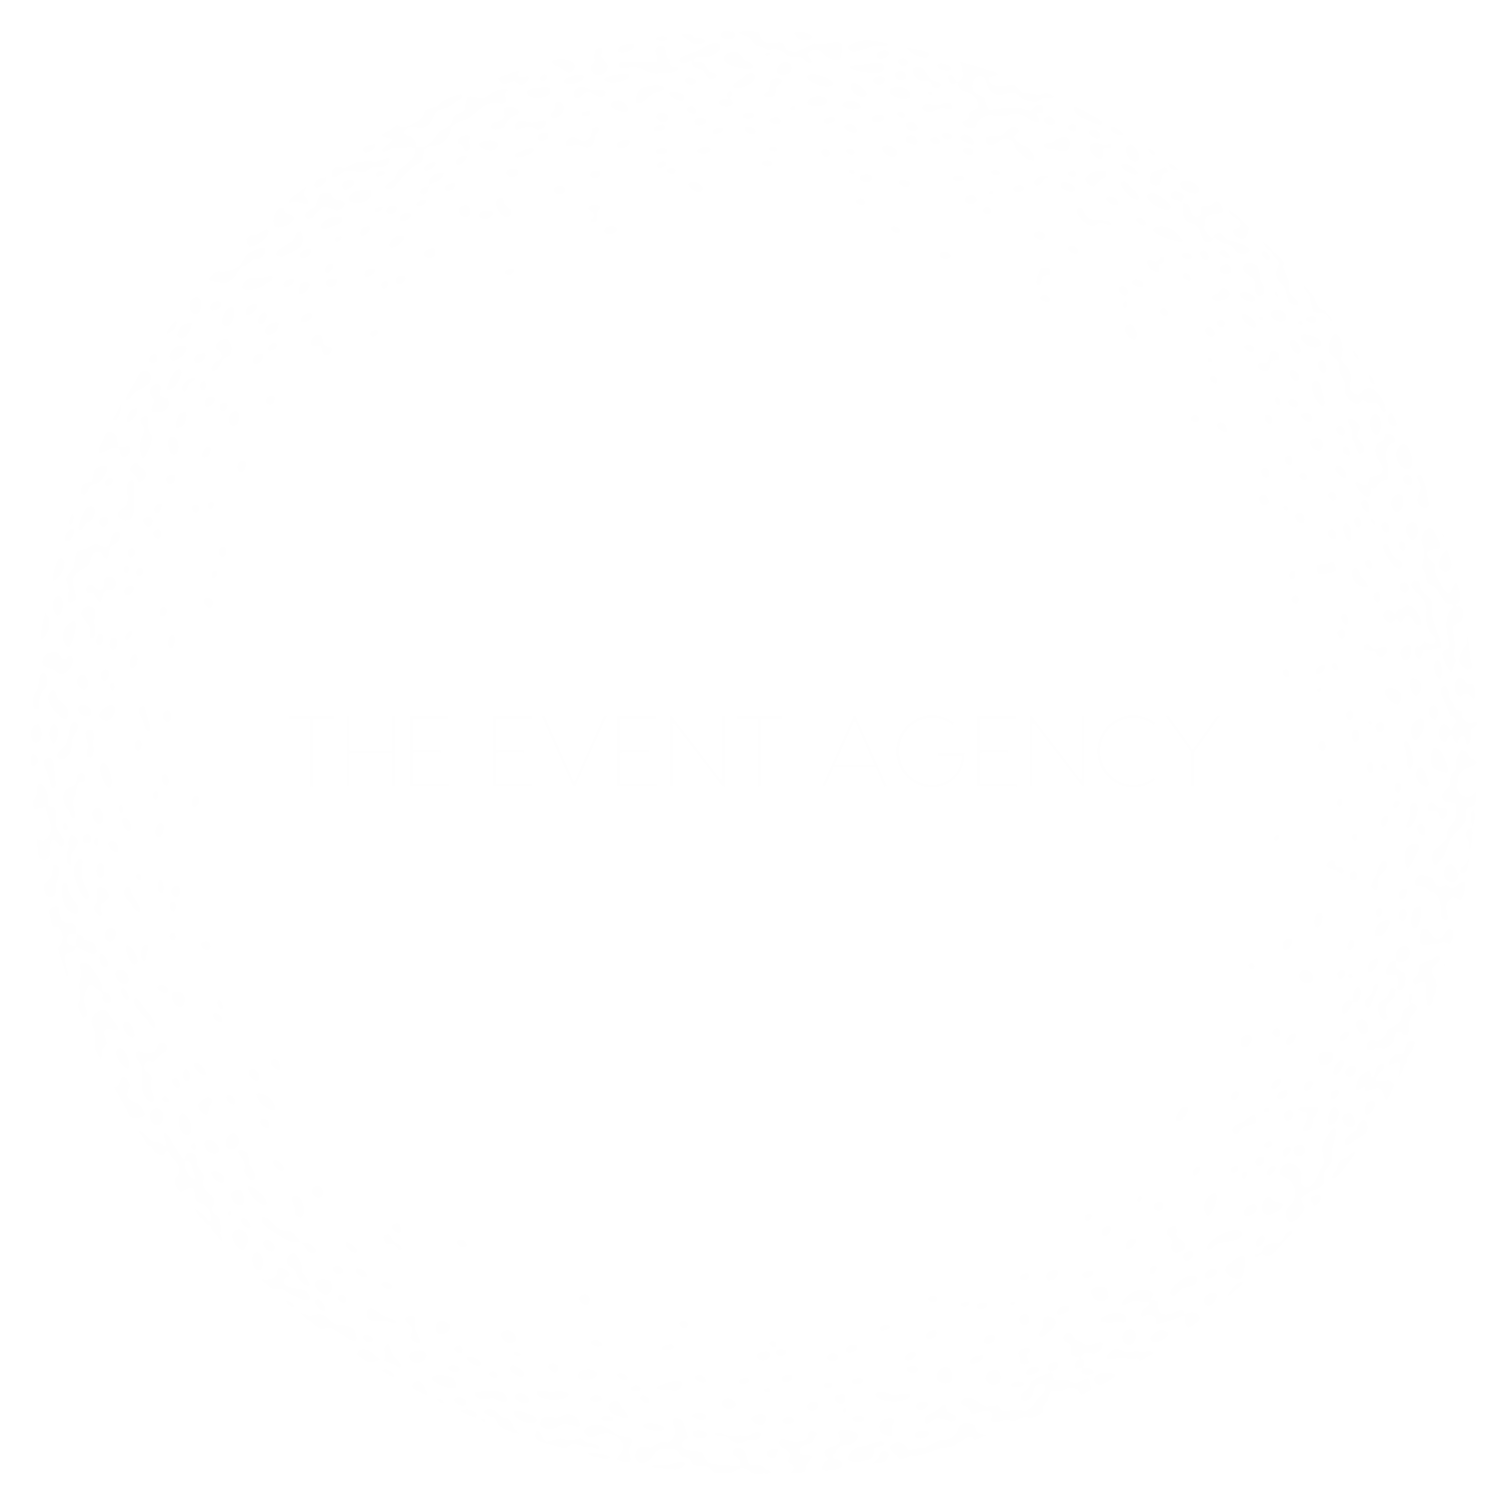 THE EVENT AGENCY